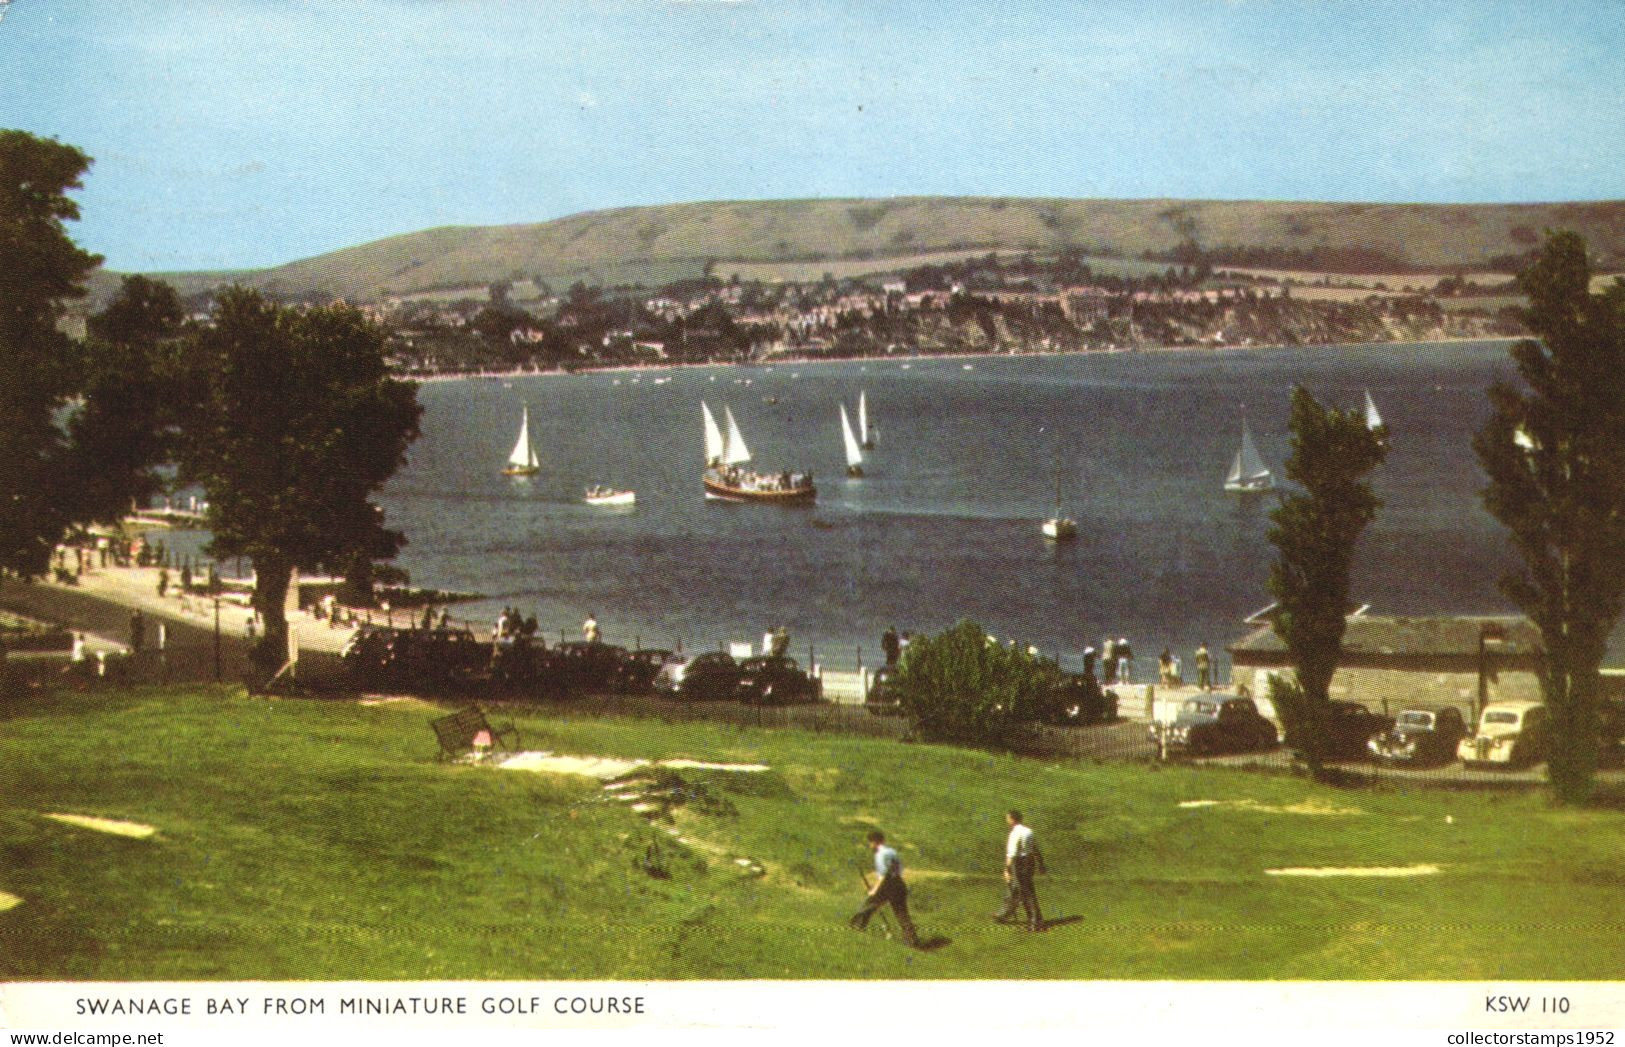 DORSET, SWANAGE BAY FROM MINIATURE GOLF COURSE, UNITED KINGDOM - Swanage